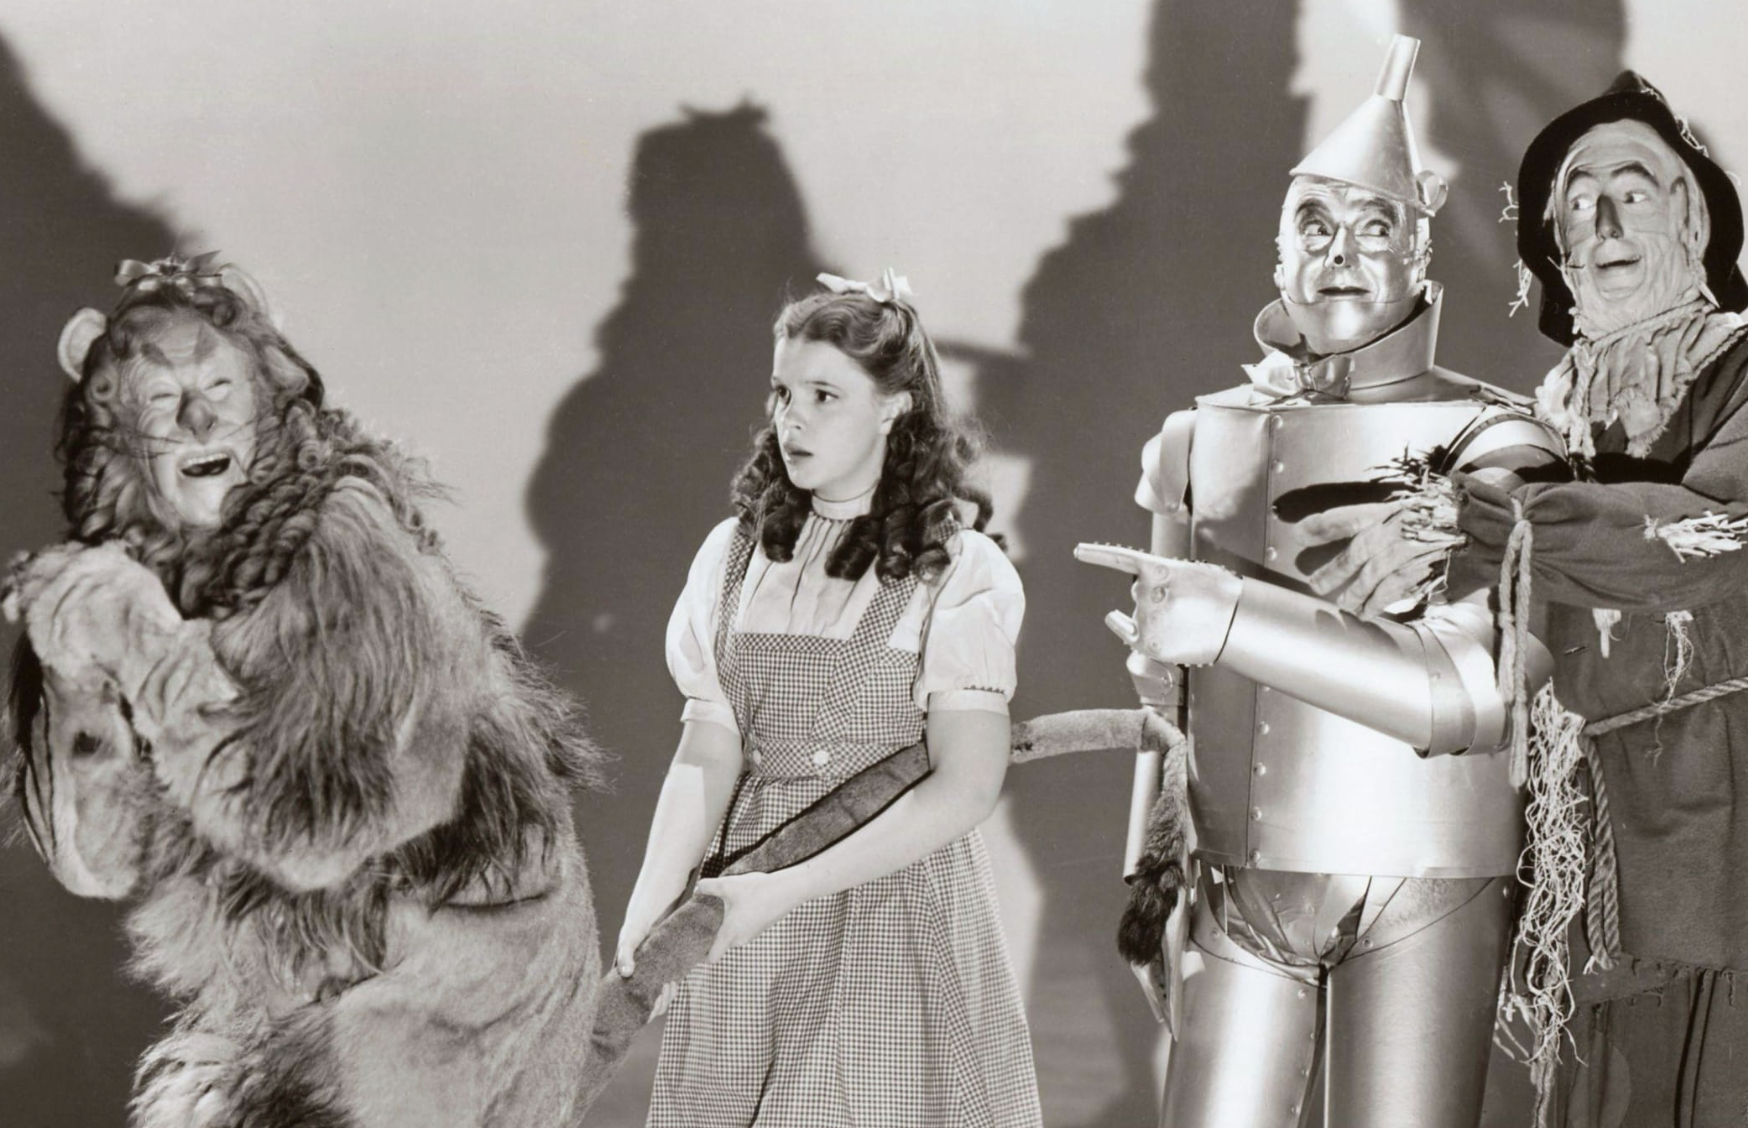 “The Wizard of Oz went through three directors during principal photography, a last minute Tin Man recast after the actor had a severe allergic reaction to the make-up, and several on-set accidents.”